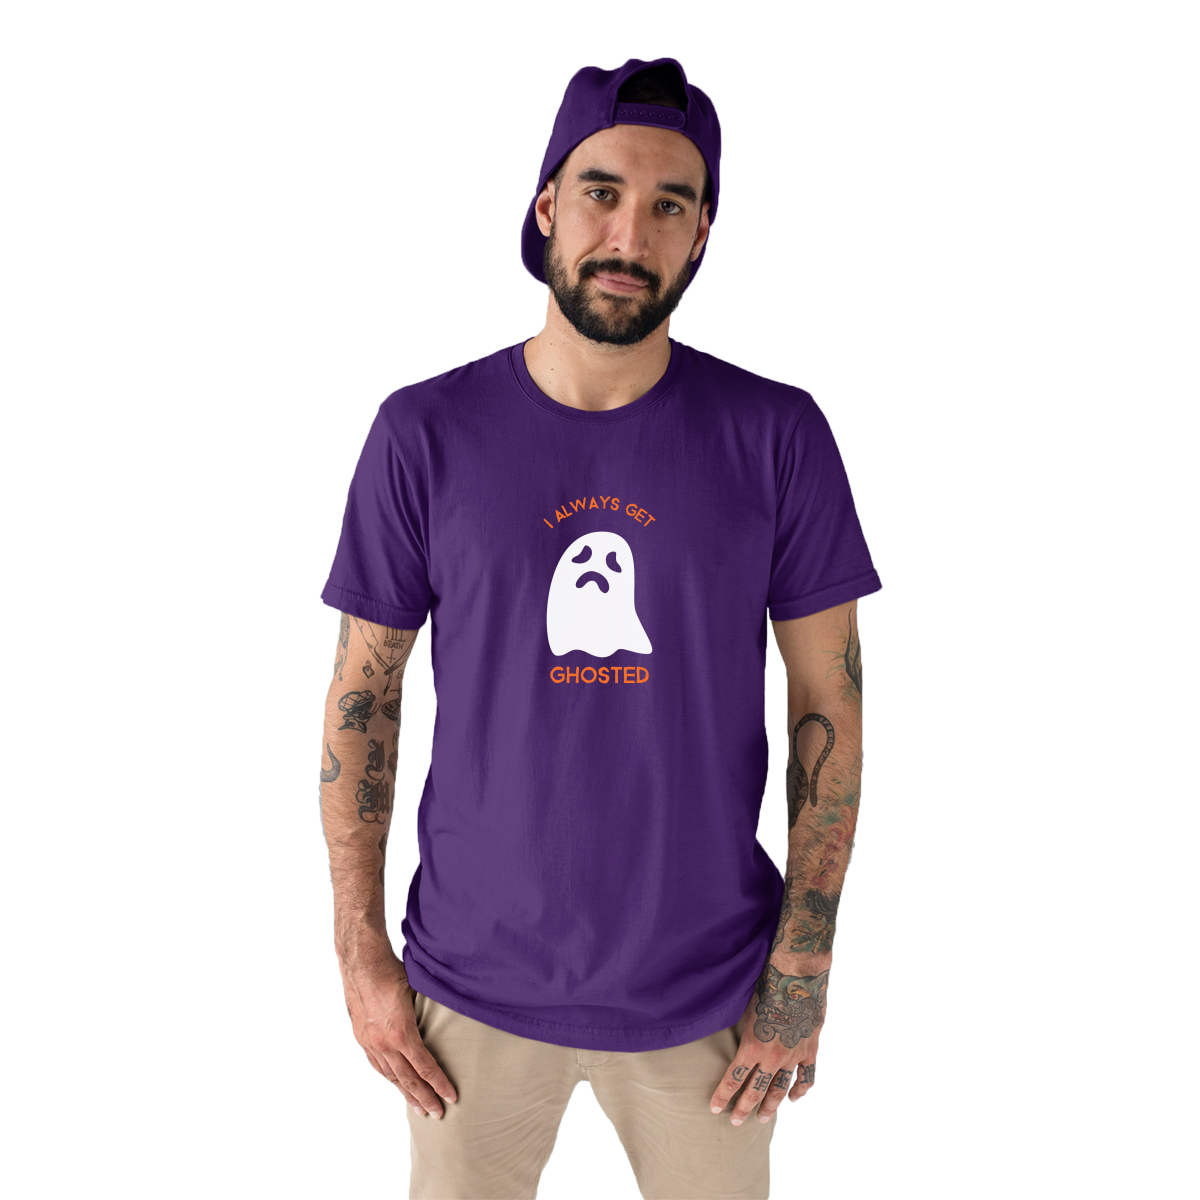 I Always Get Ghosted Men's T-shirt | Purple